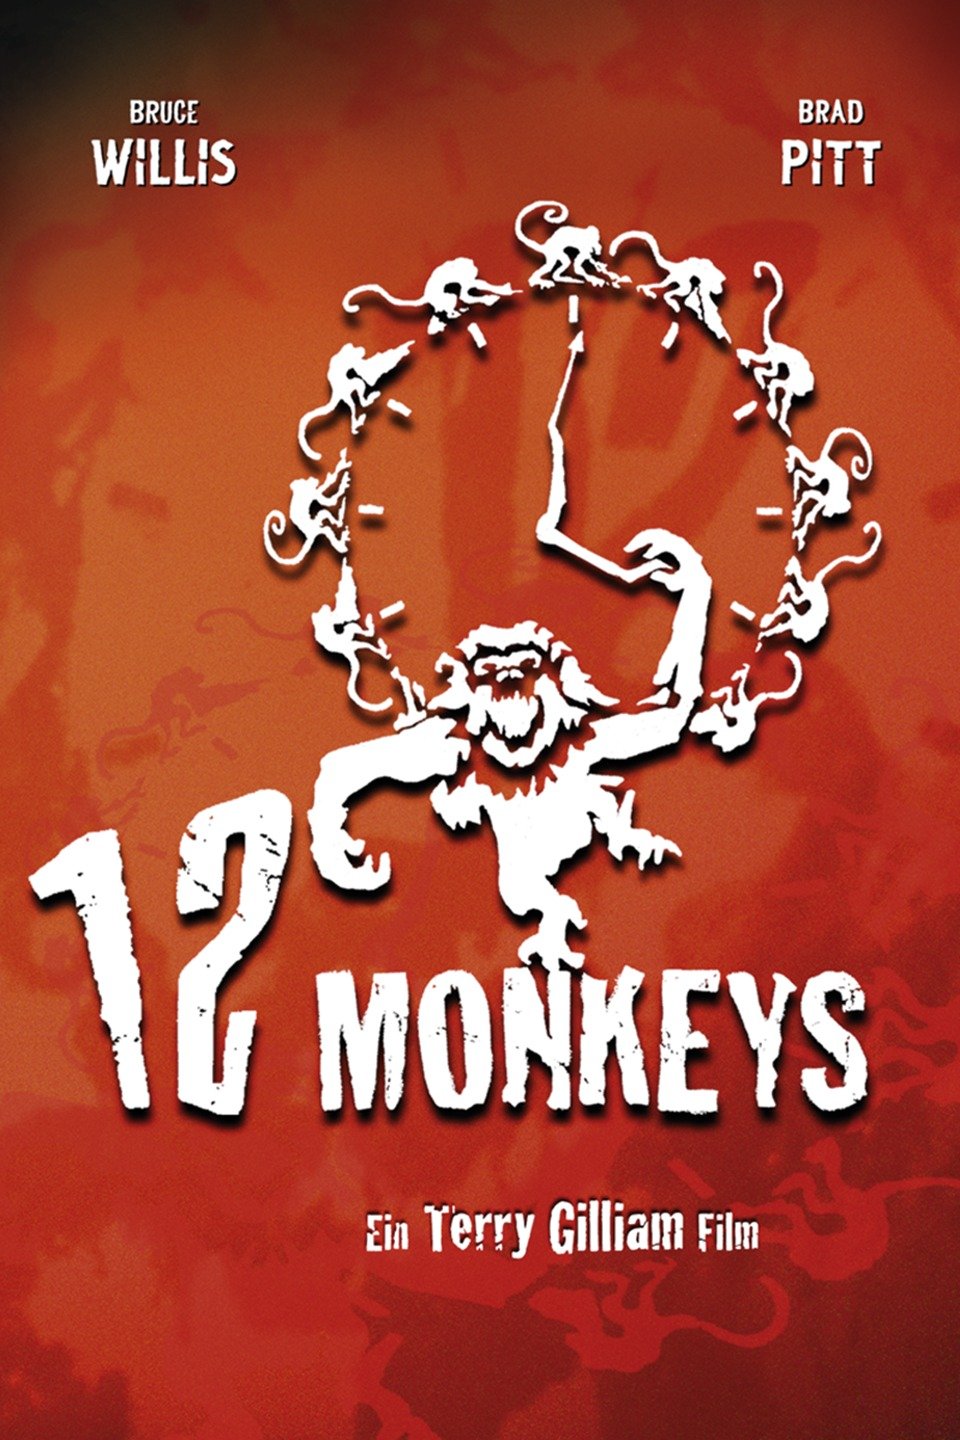 12 monkeys movie review rotten tomatoes